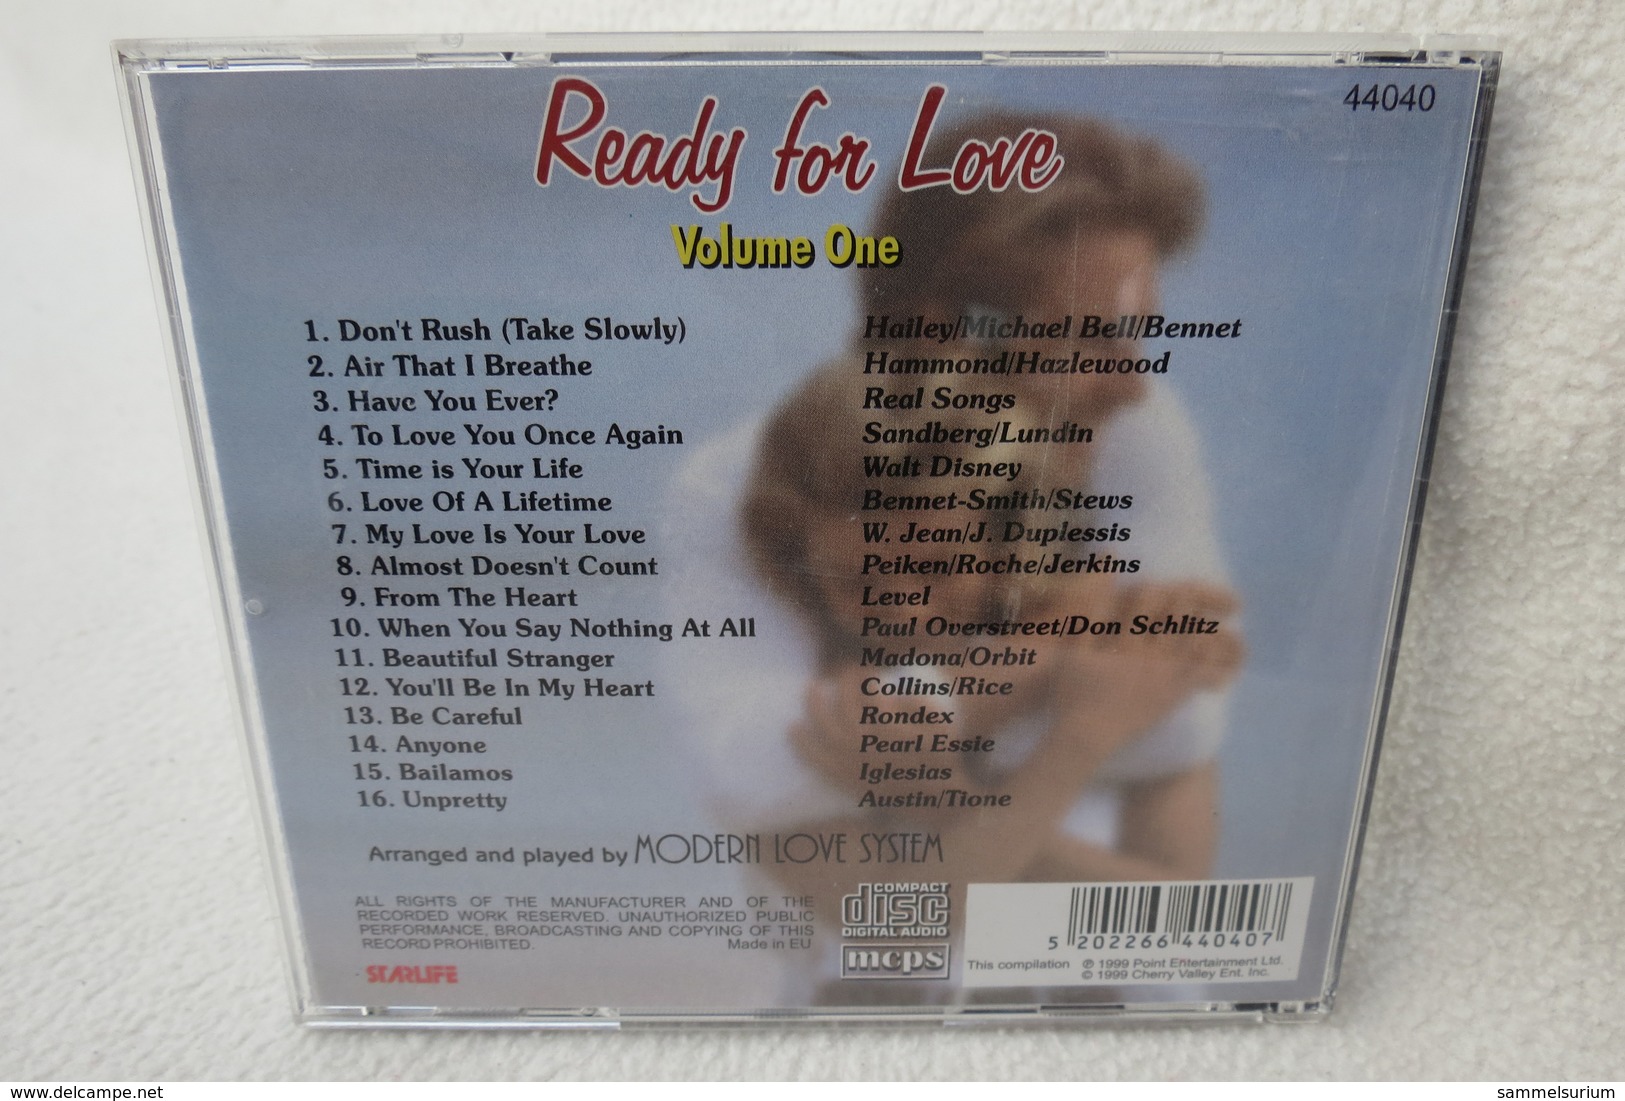 CD "Ready For Love" Most Beautiful Love Songs, Volume One - Hit-Compilations